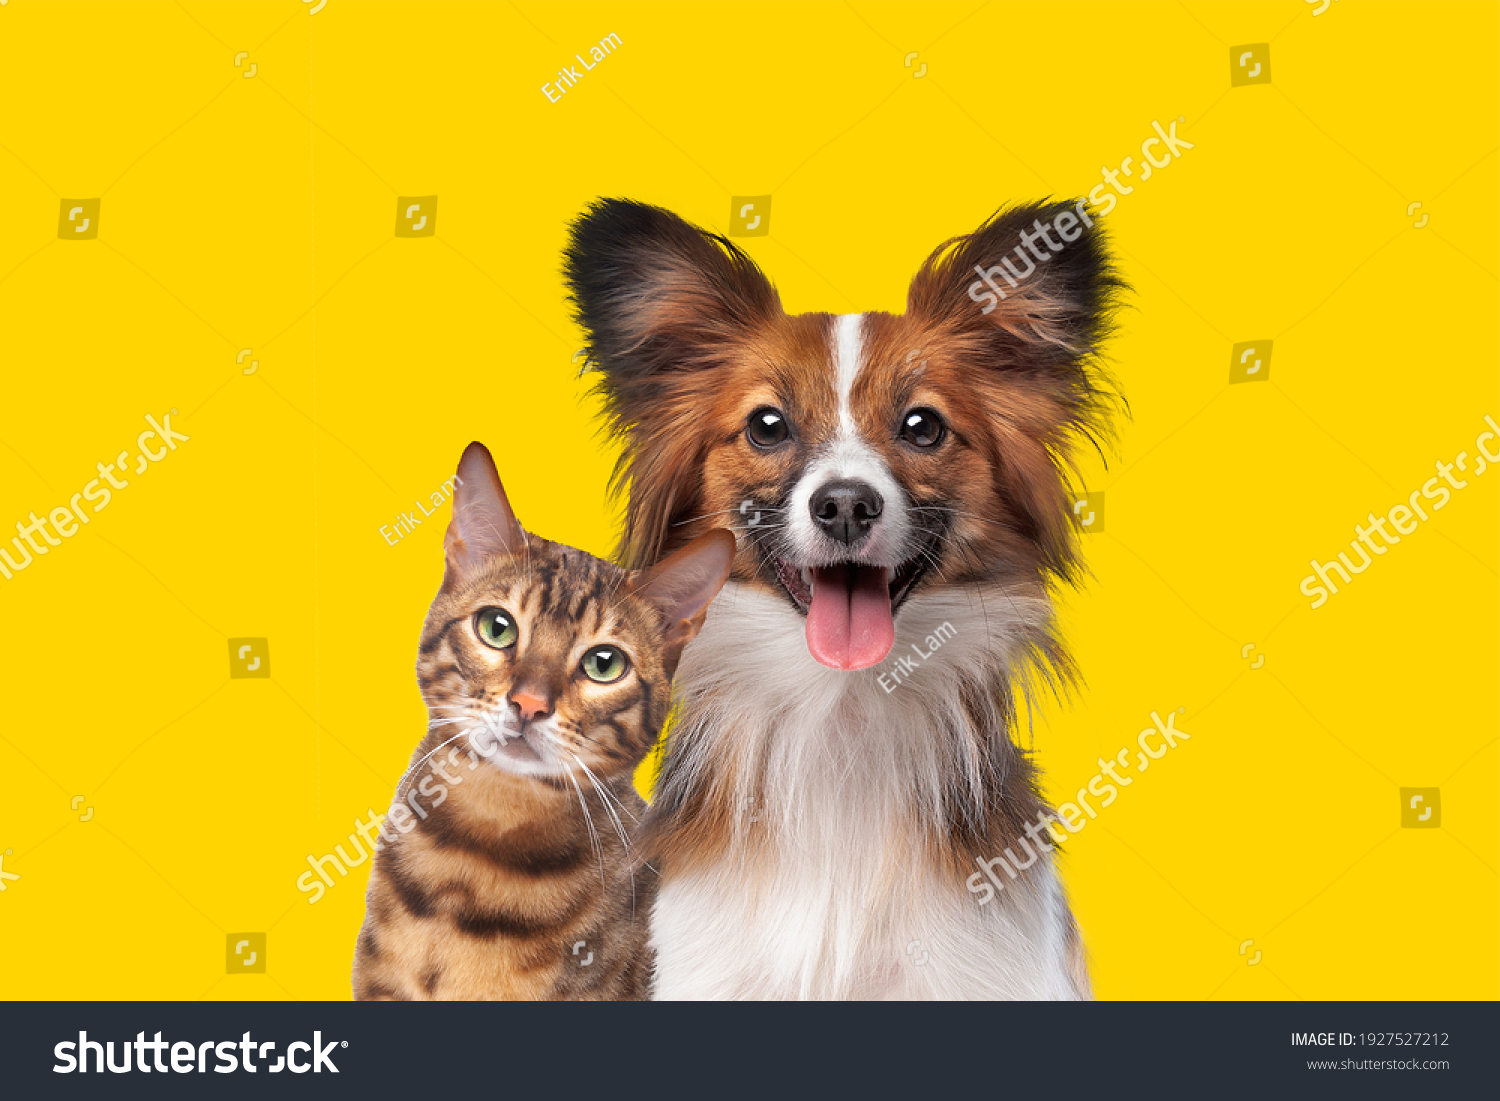 portrait of a cat and dog in front of bright yellow background #1927527212